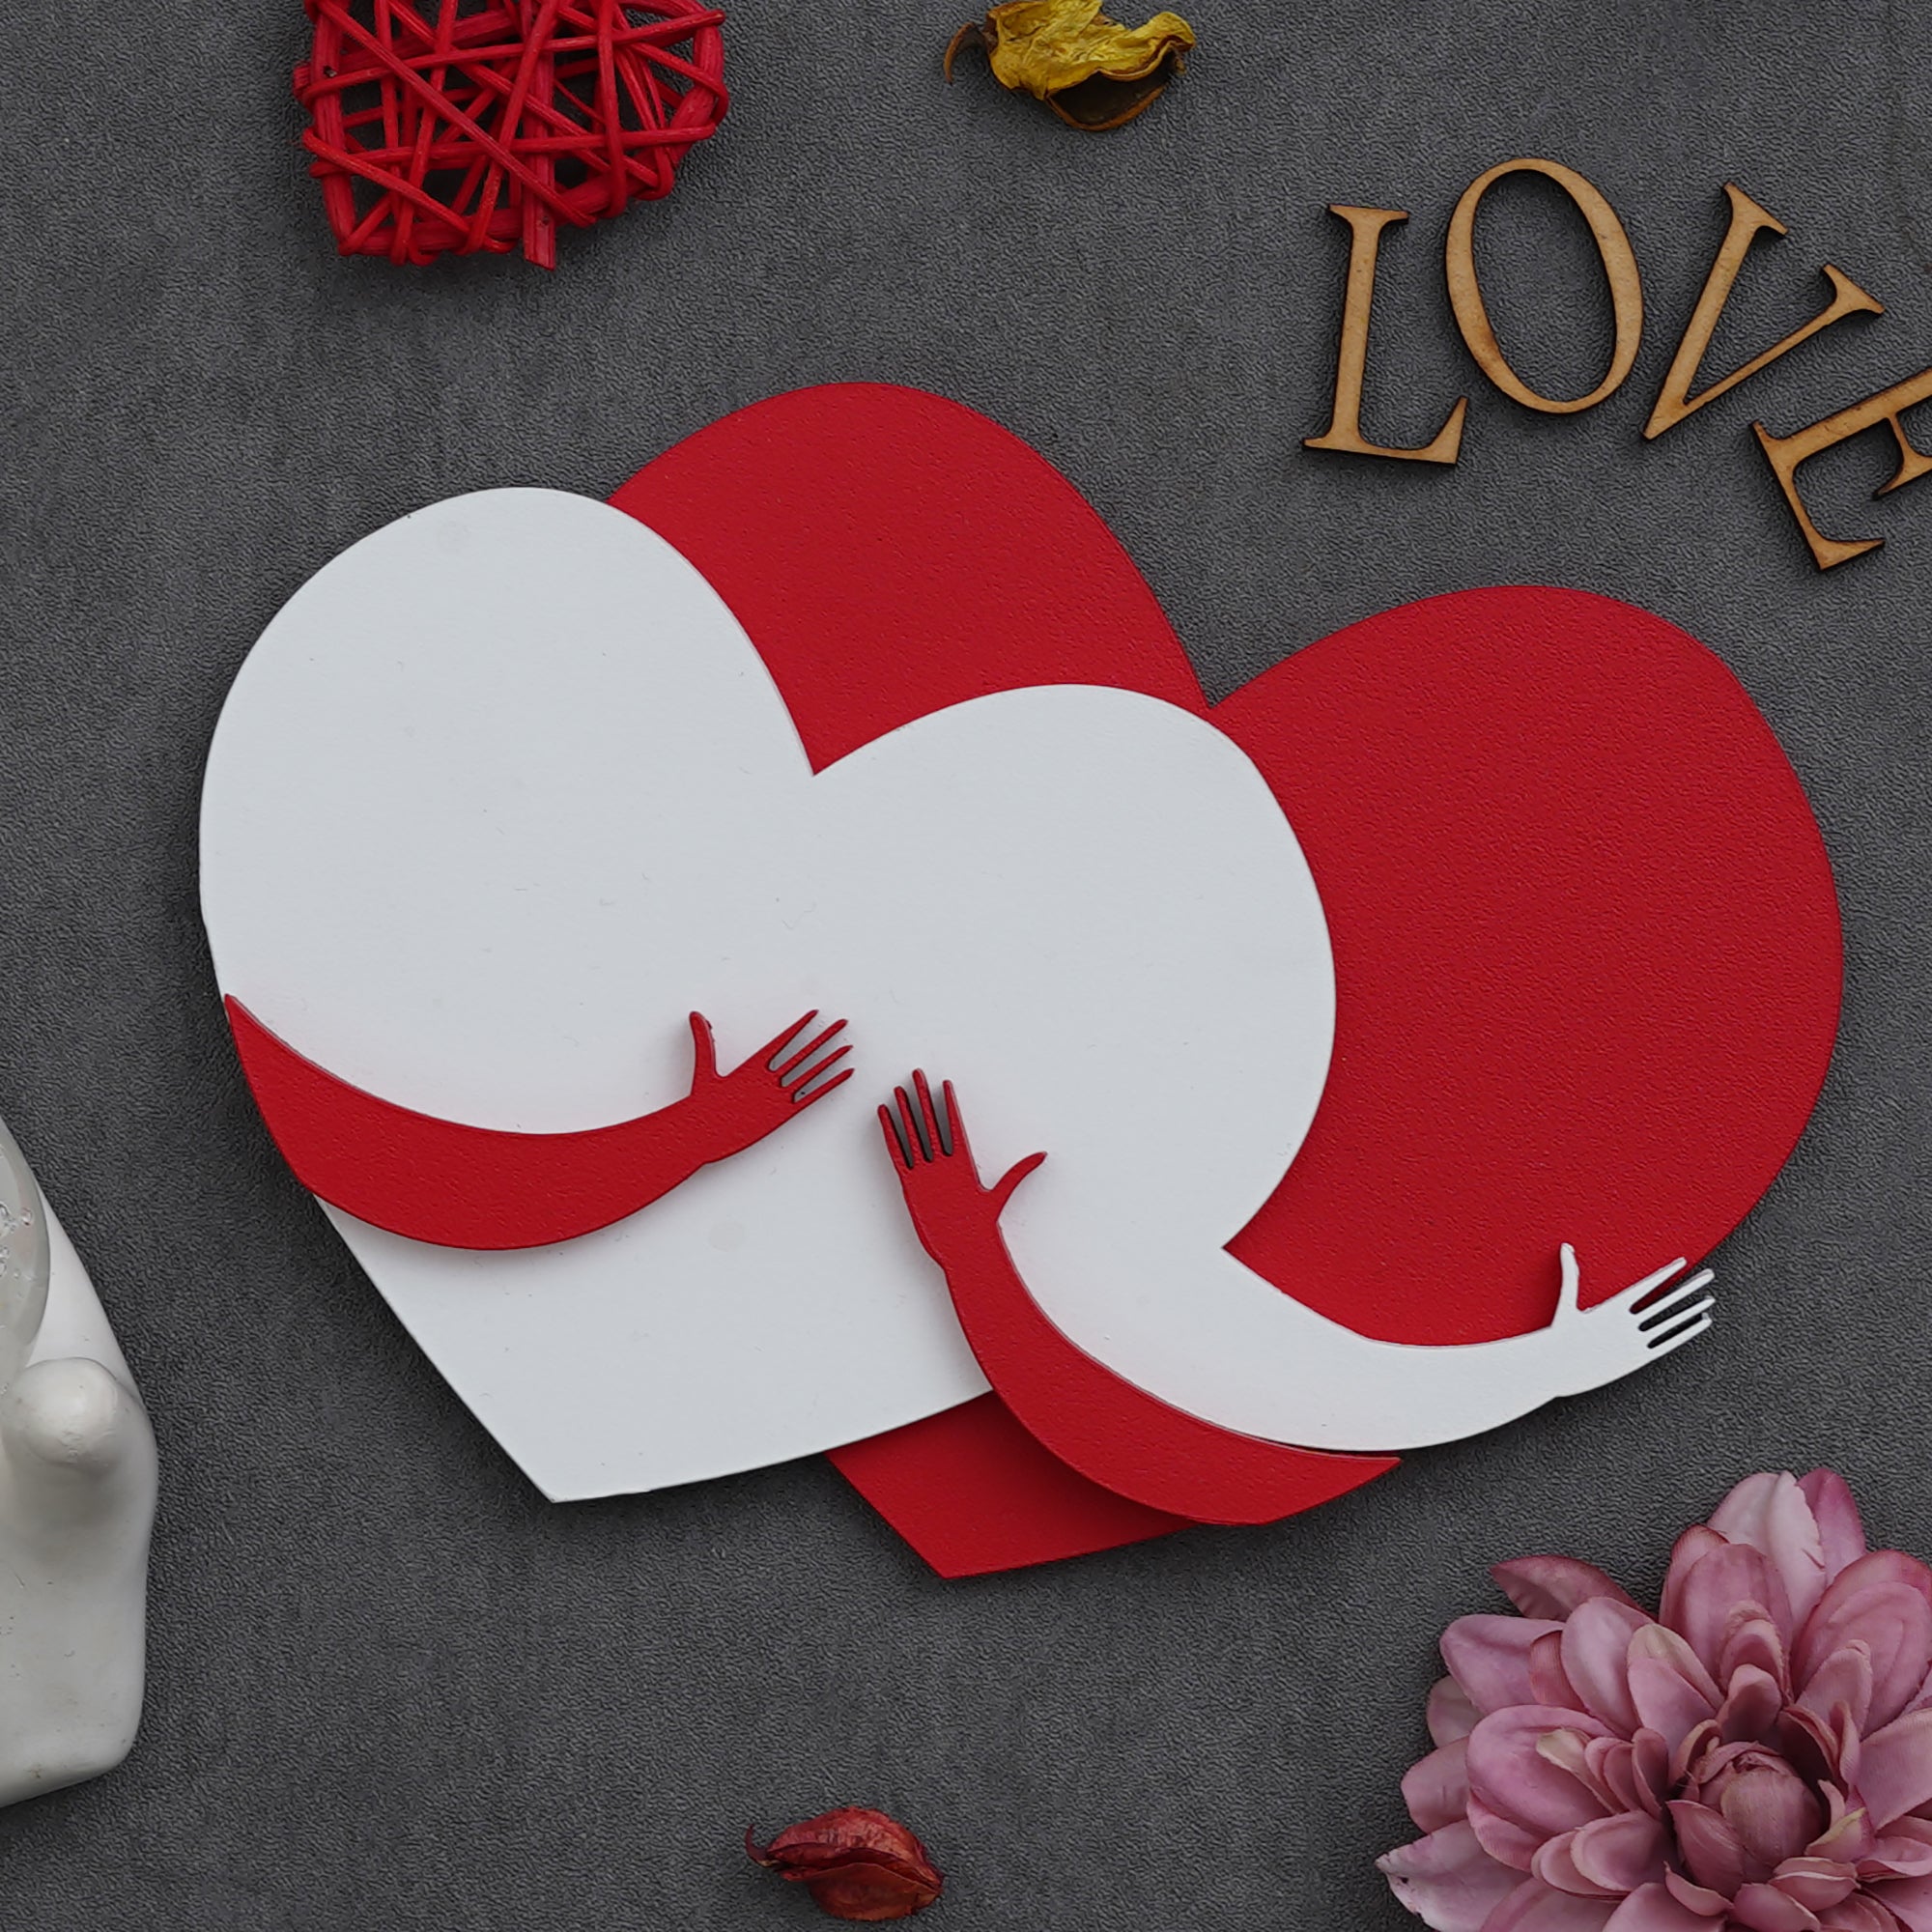 Valentine Combo of Set of 8 Love Post Cards Gift Cards Set, Red and White Heart Hugging Each Other Gift Set, Red Roses Bouquet and White, Red Teddy Bear Valentine's Rectangle Shaped Gift Box 3